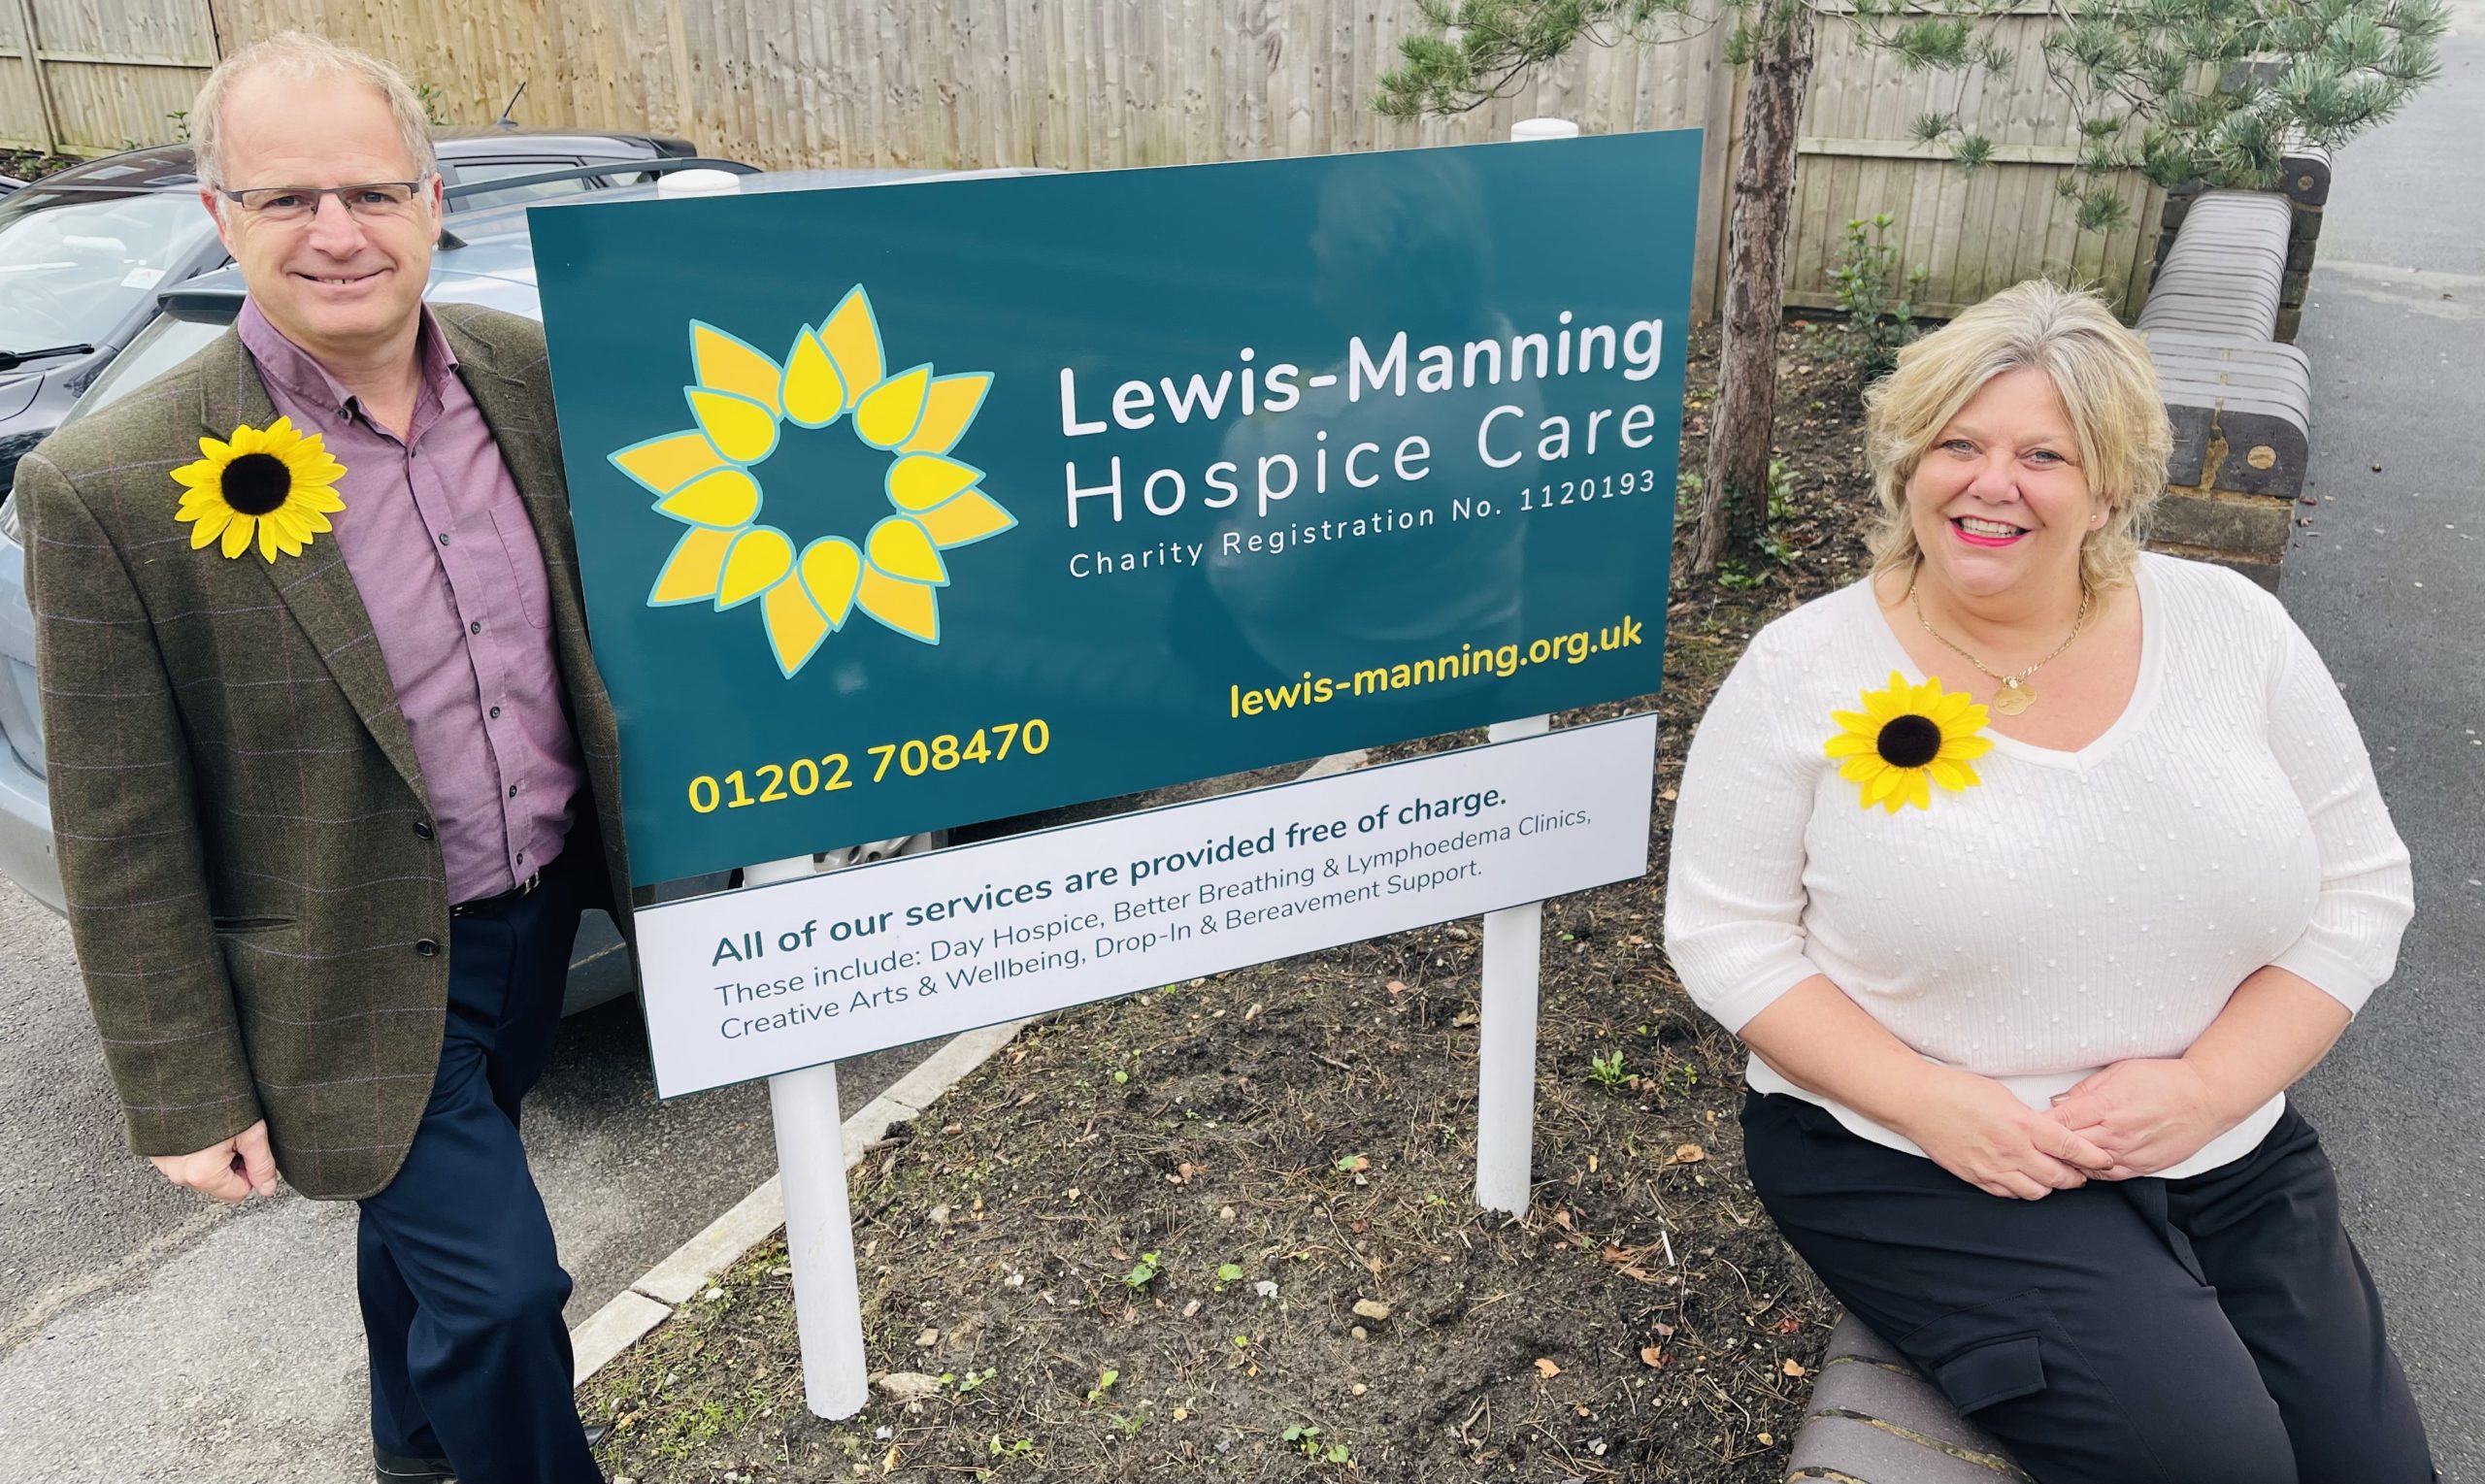 Lewis-Manning Hospice Care welcomes on board new Trustee talent